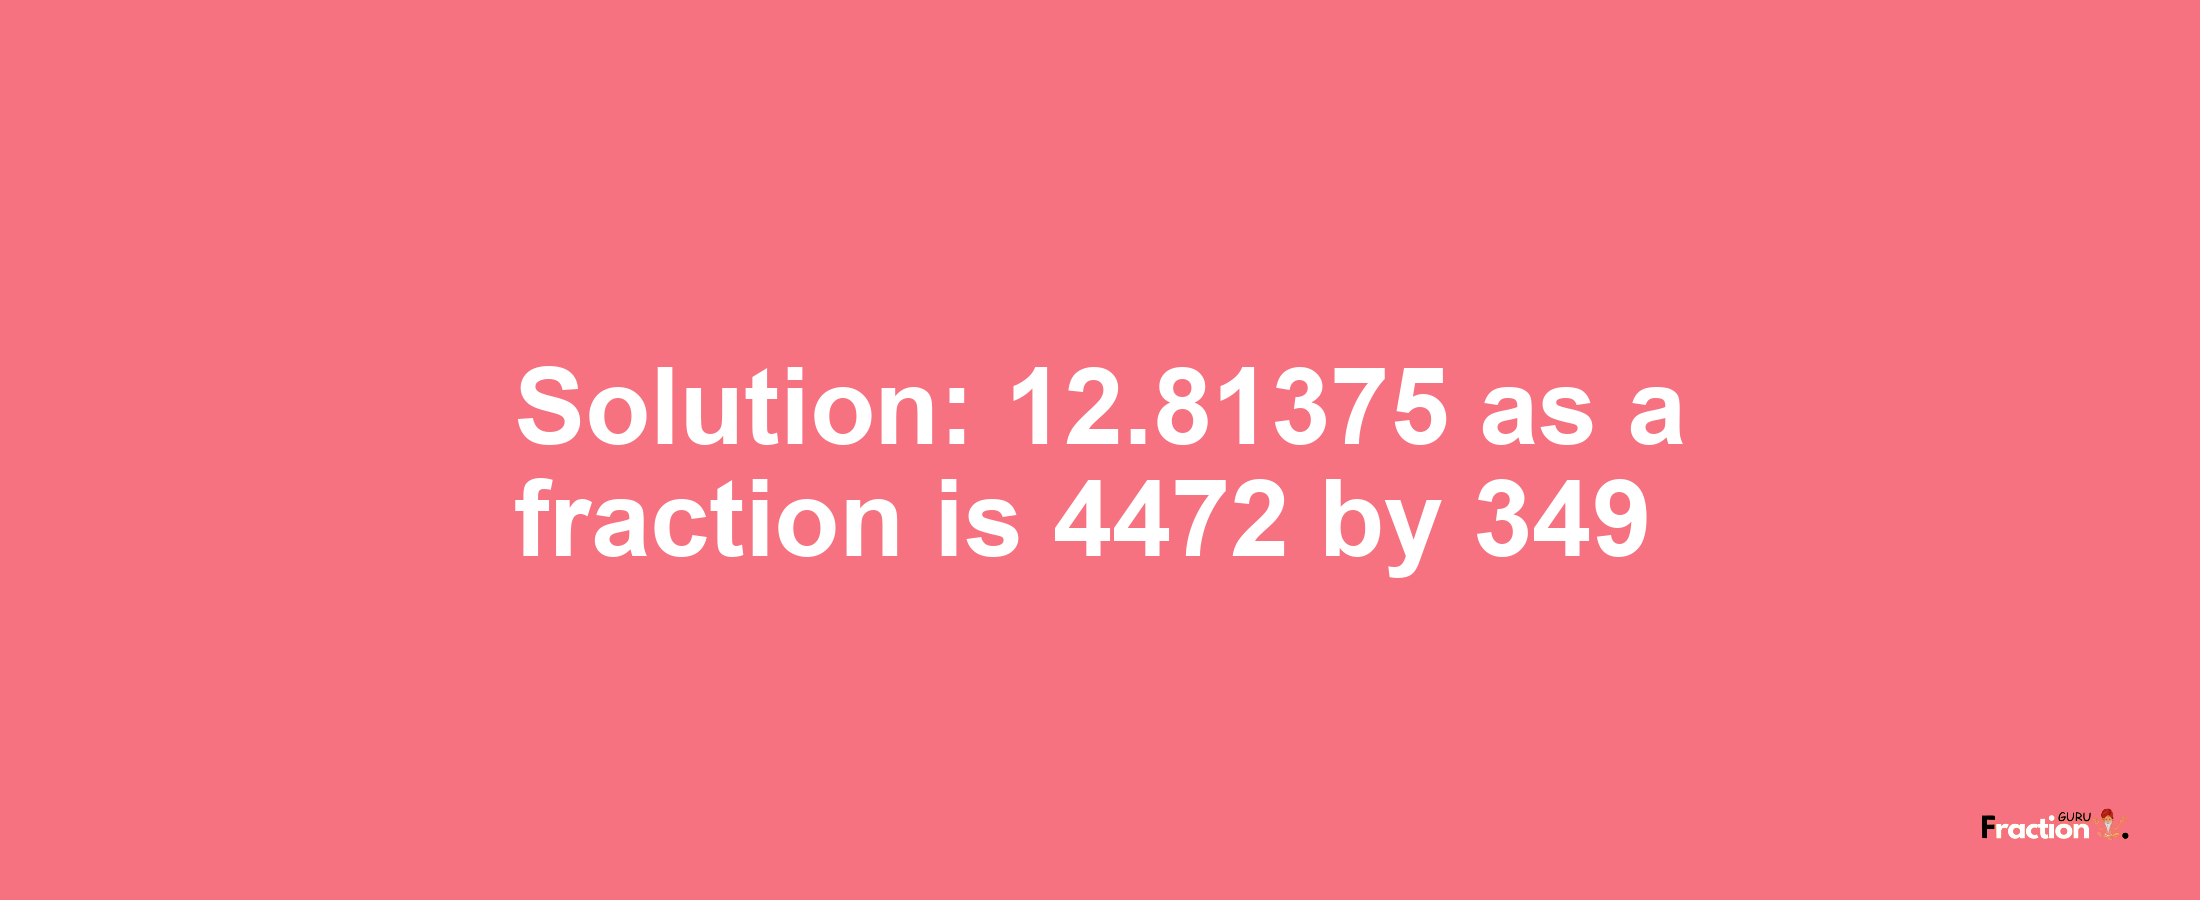 Solution:12.81375 as a fraction is 4472/349